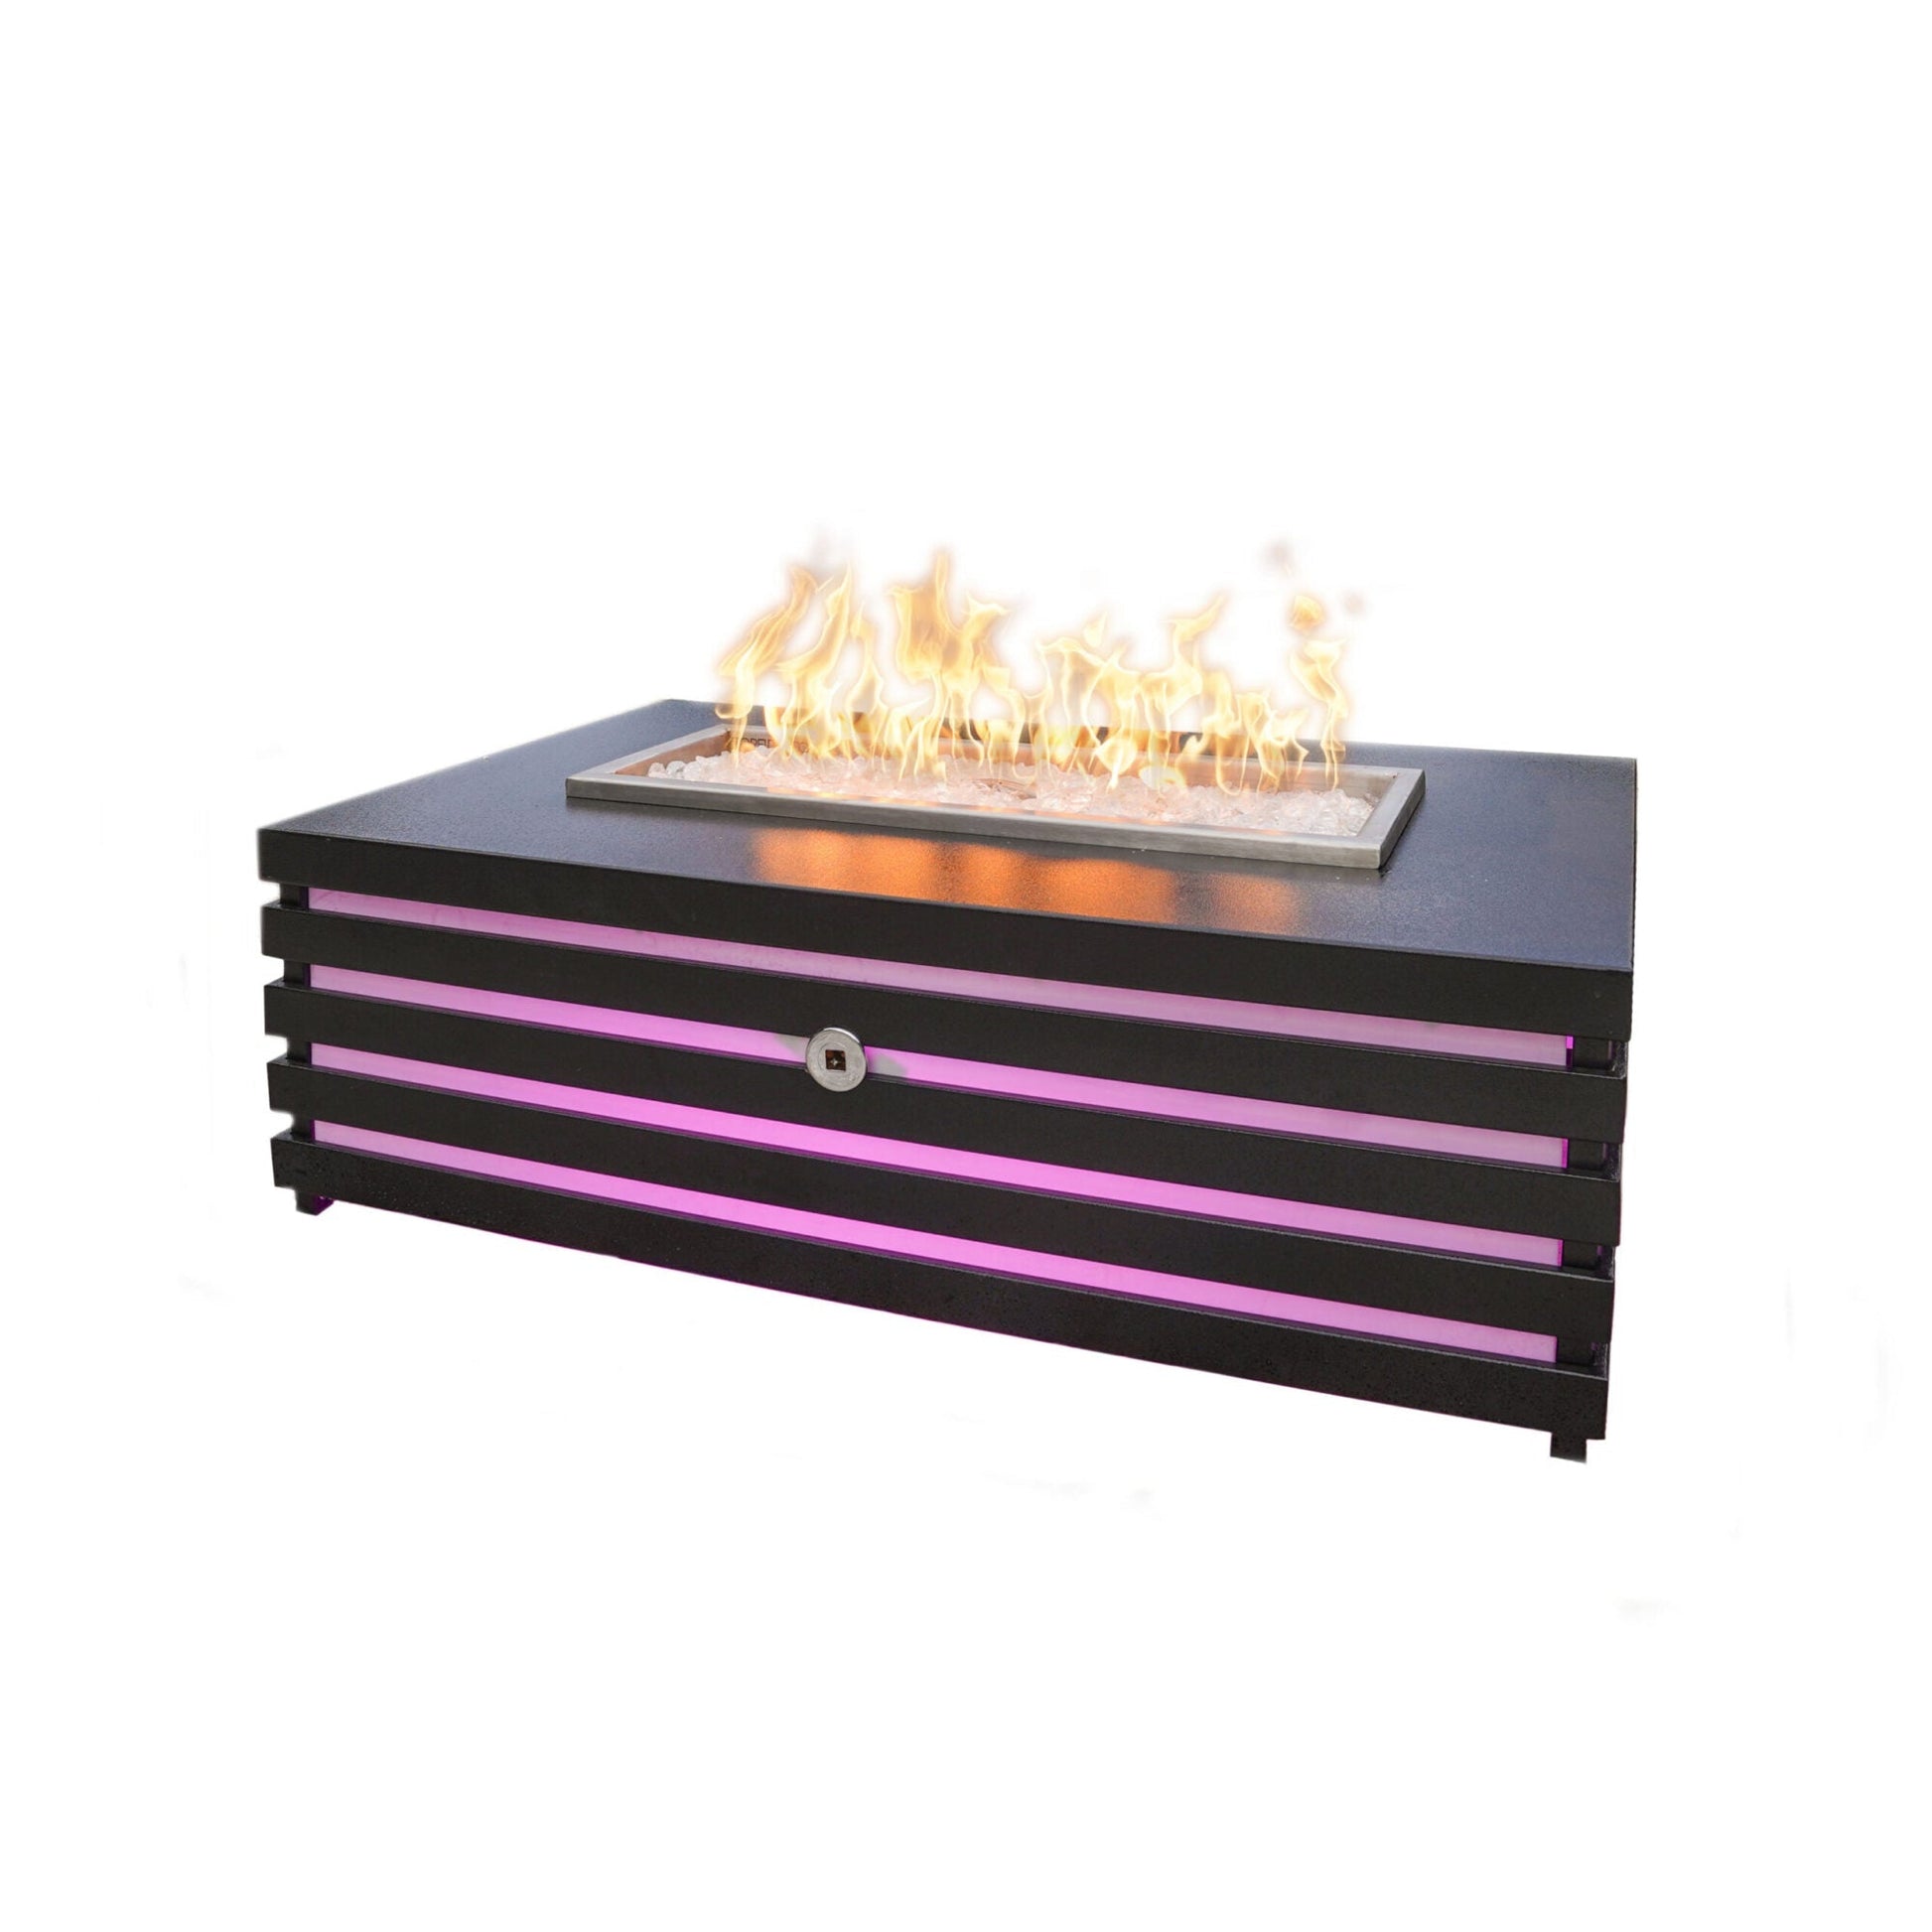 The Outdoor Plus Amina 48" Black Powder Coated Natural Gas Fire Pit with 12V Electronic Ignition